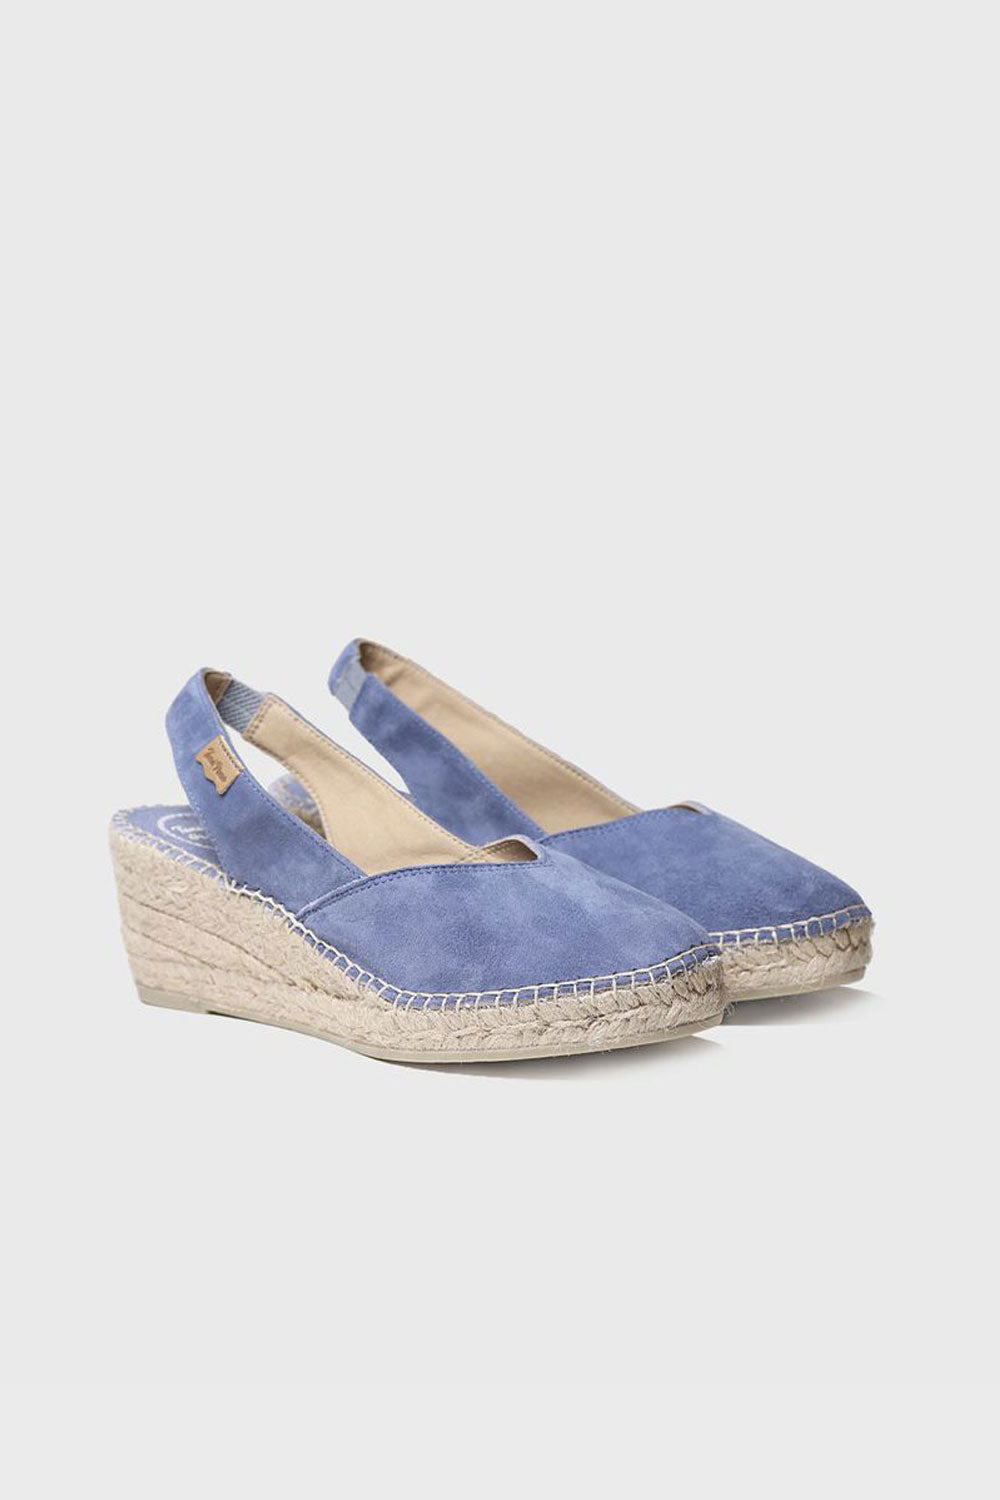 "BETTY A" Closed wedge espadrilles